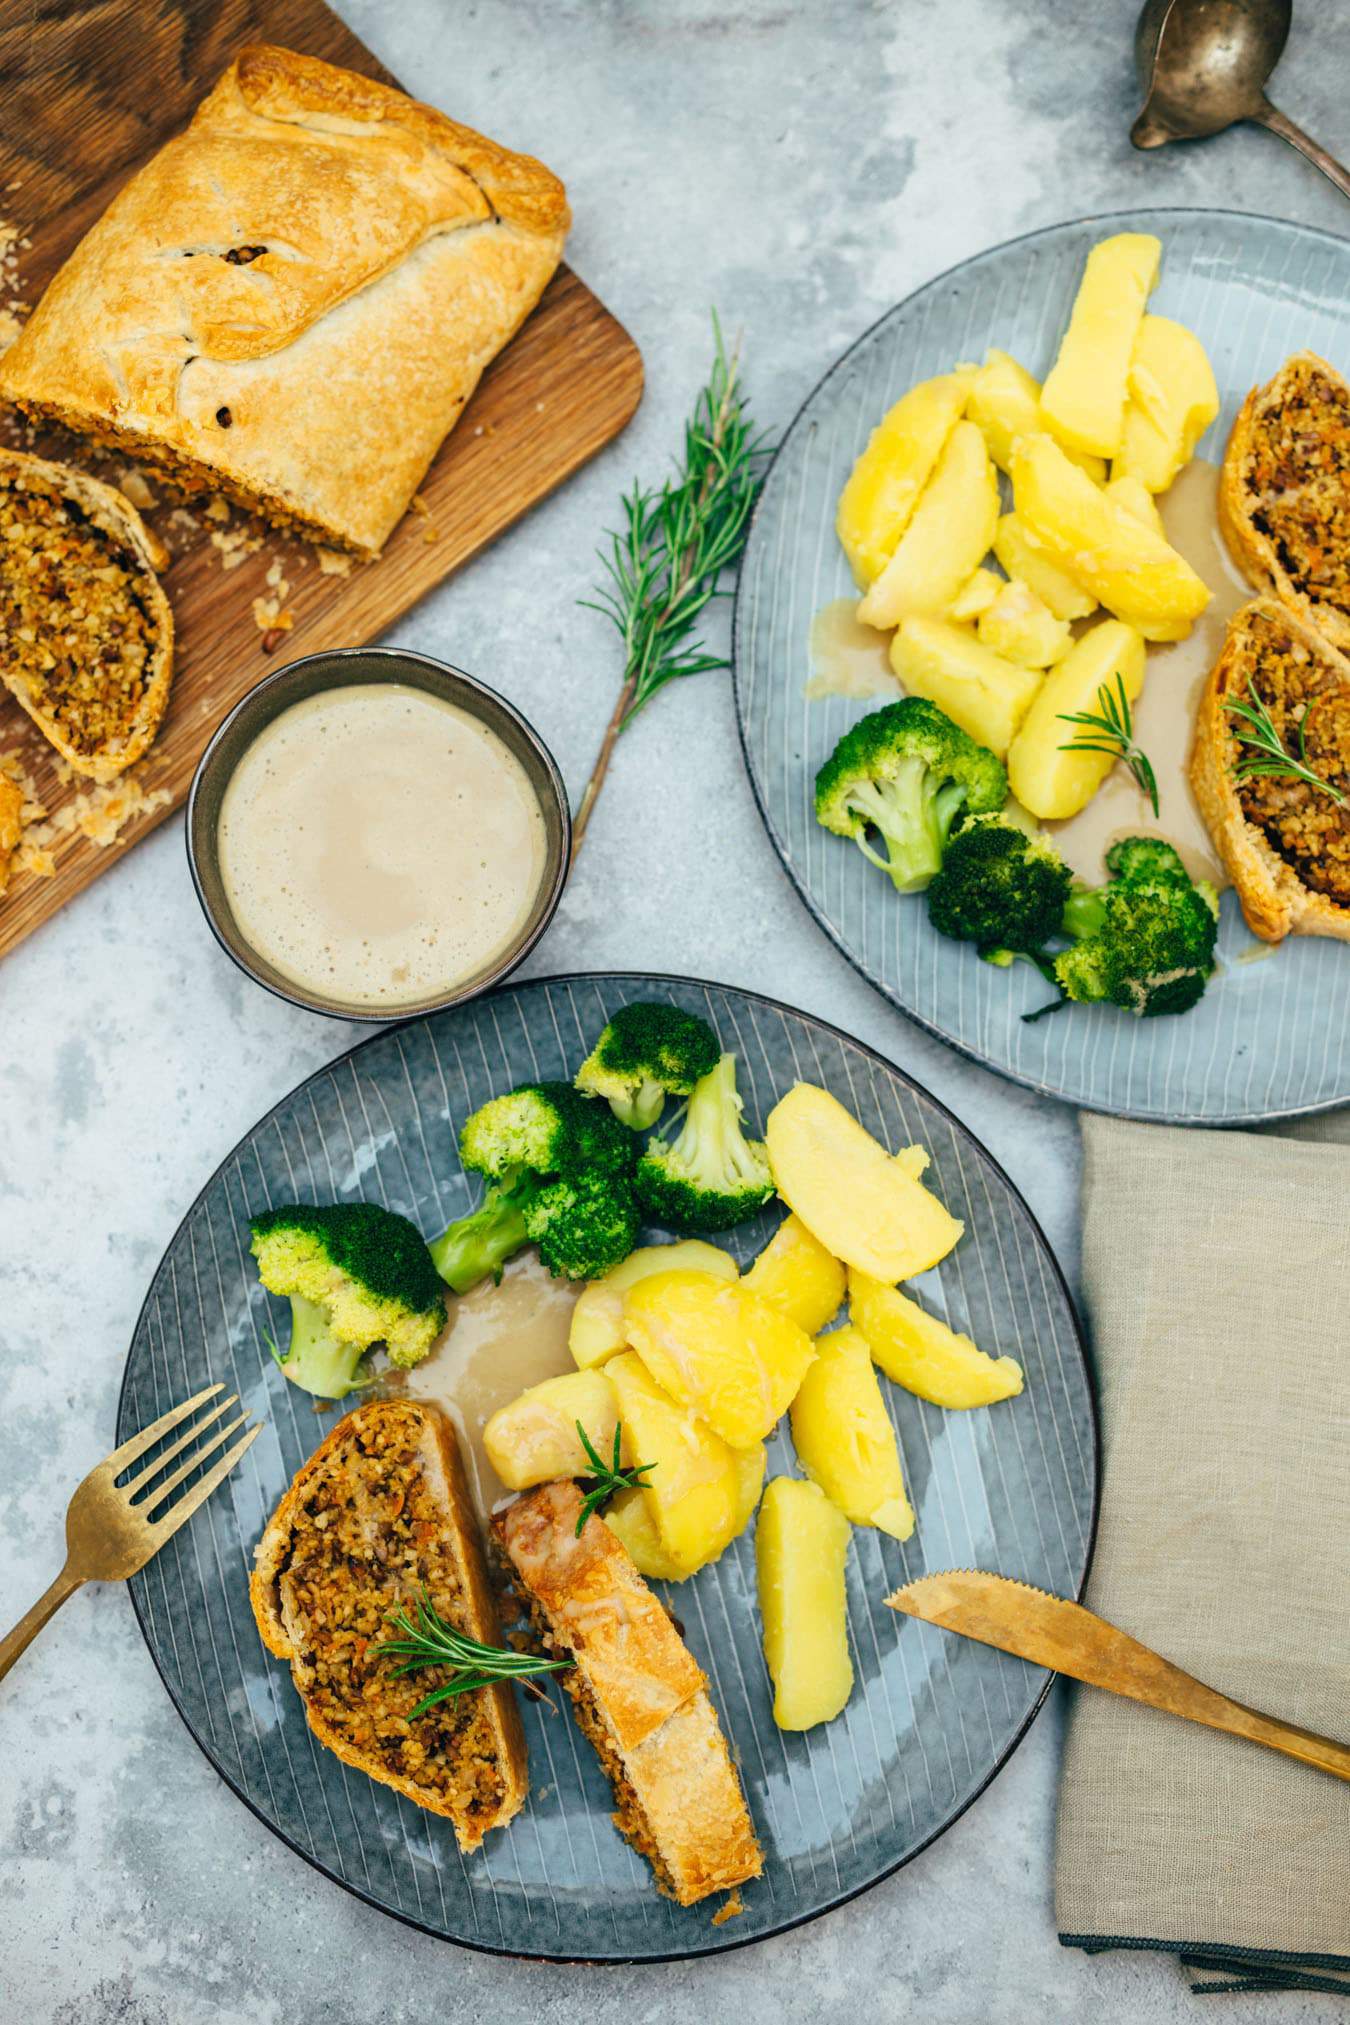 vegan roast with delicious sauce prepared in only 60 minutes